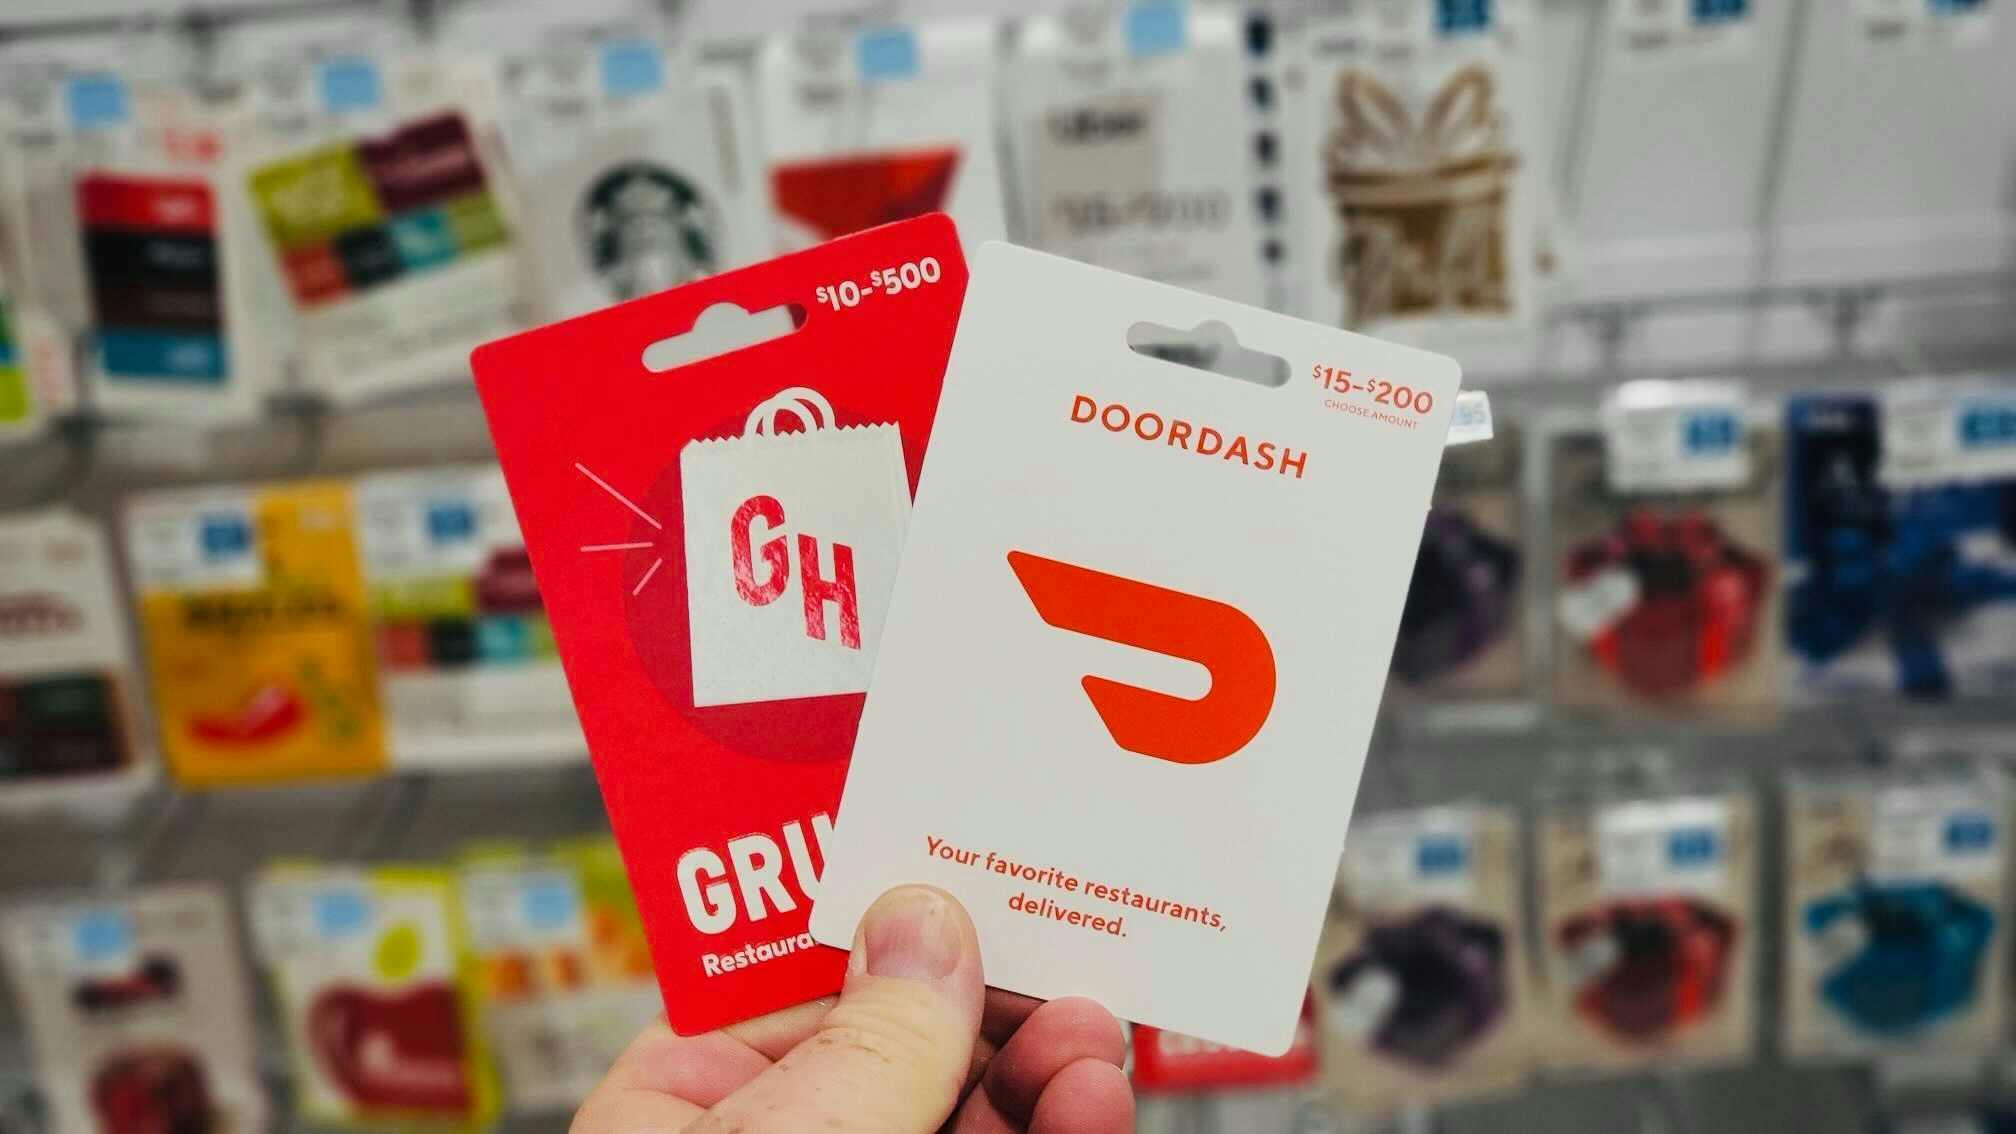 - Two gift cards being held center-frame in front of a wall of gift cards, one is for Grubhub and one for Doordash.